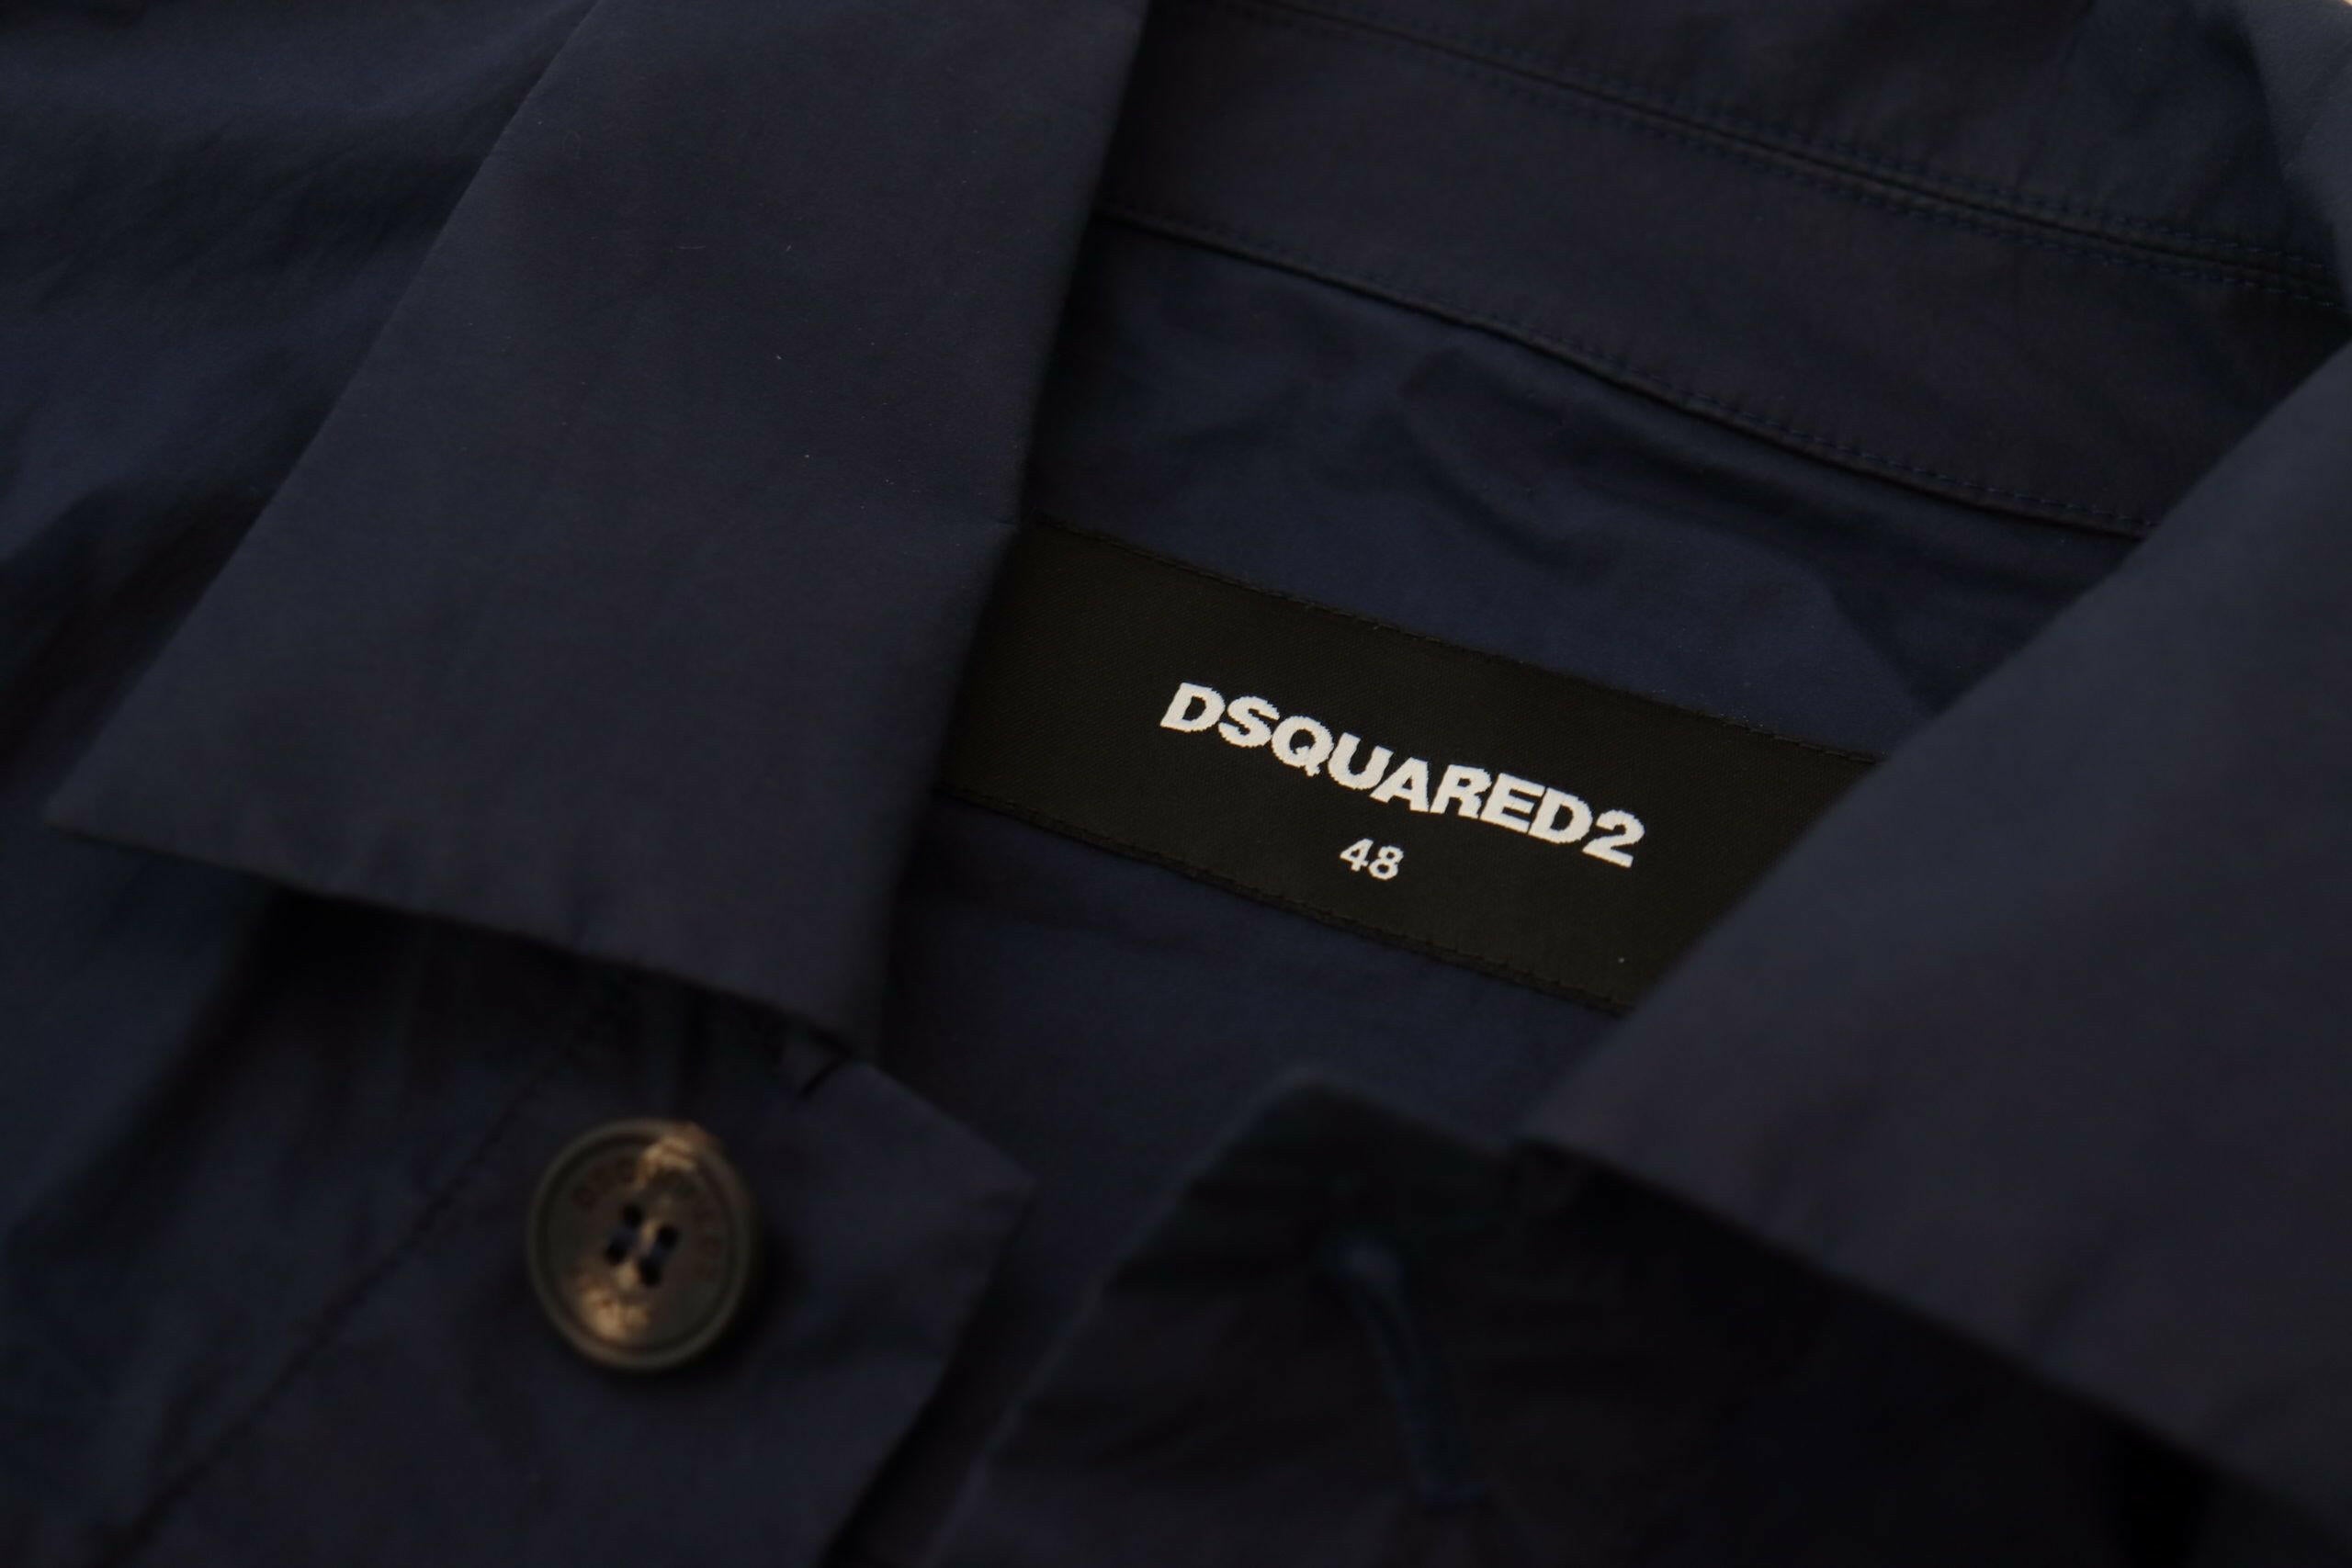 Dsquared² Dark Blue Cotton Collared Long Sleeves Casual Shirt - GENUINE AUTHENTIC BRAND LLC  